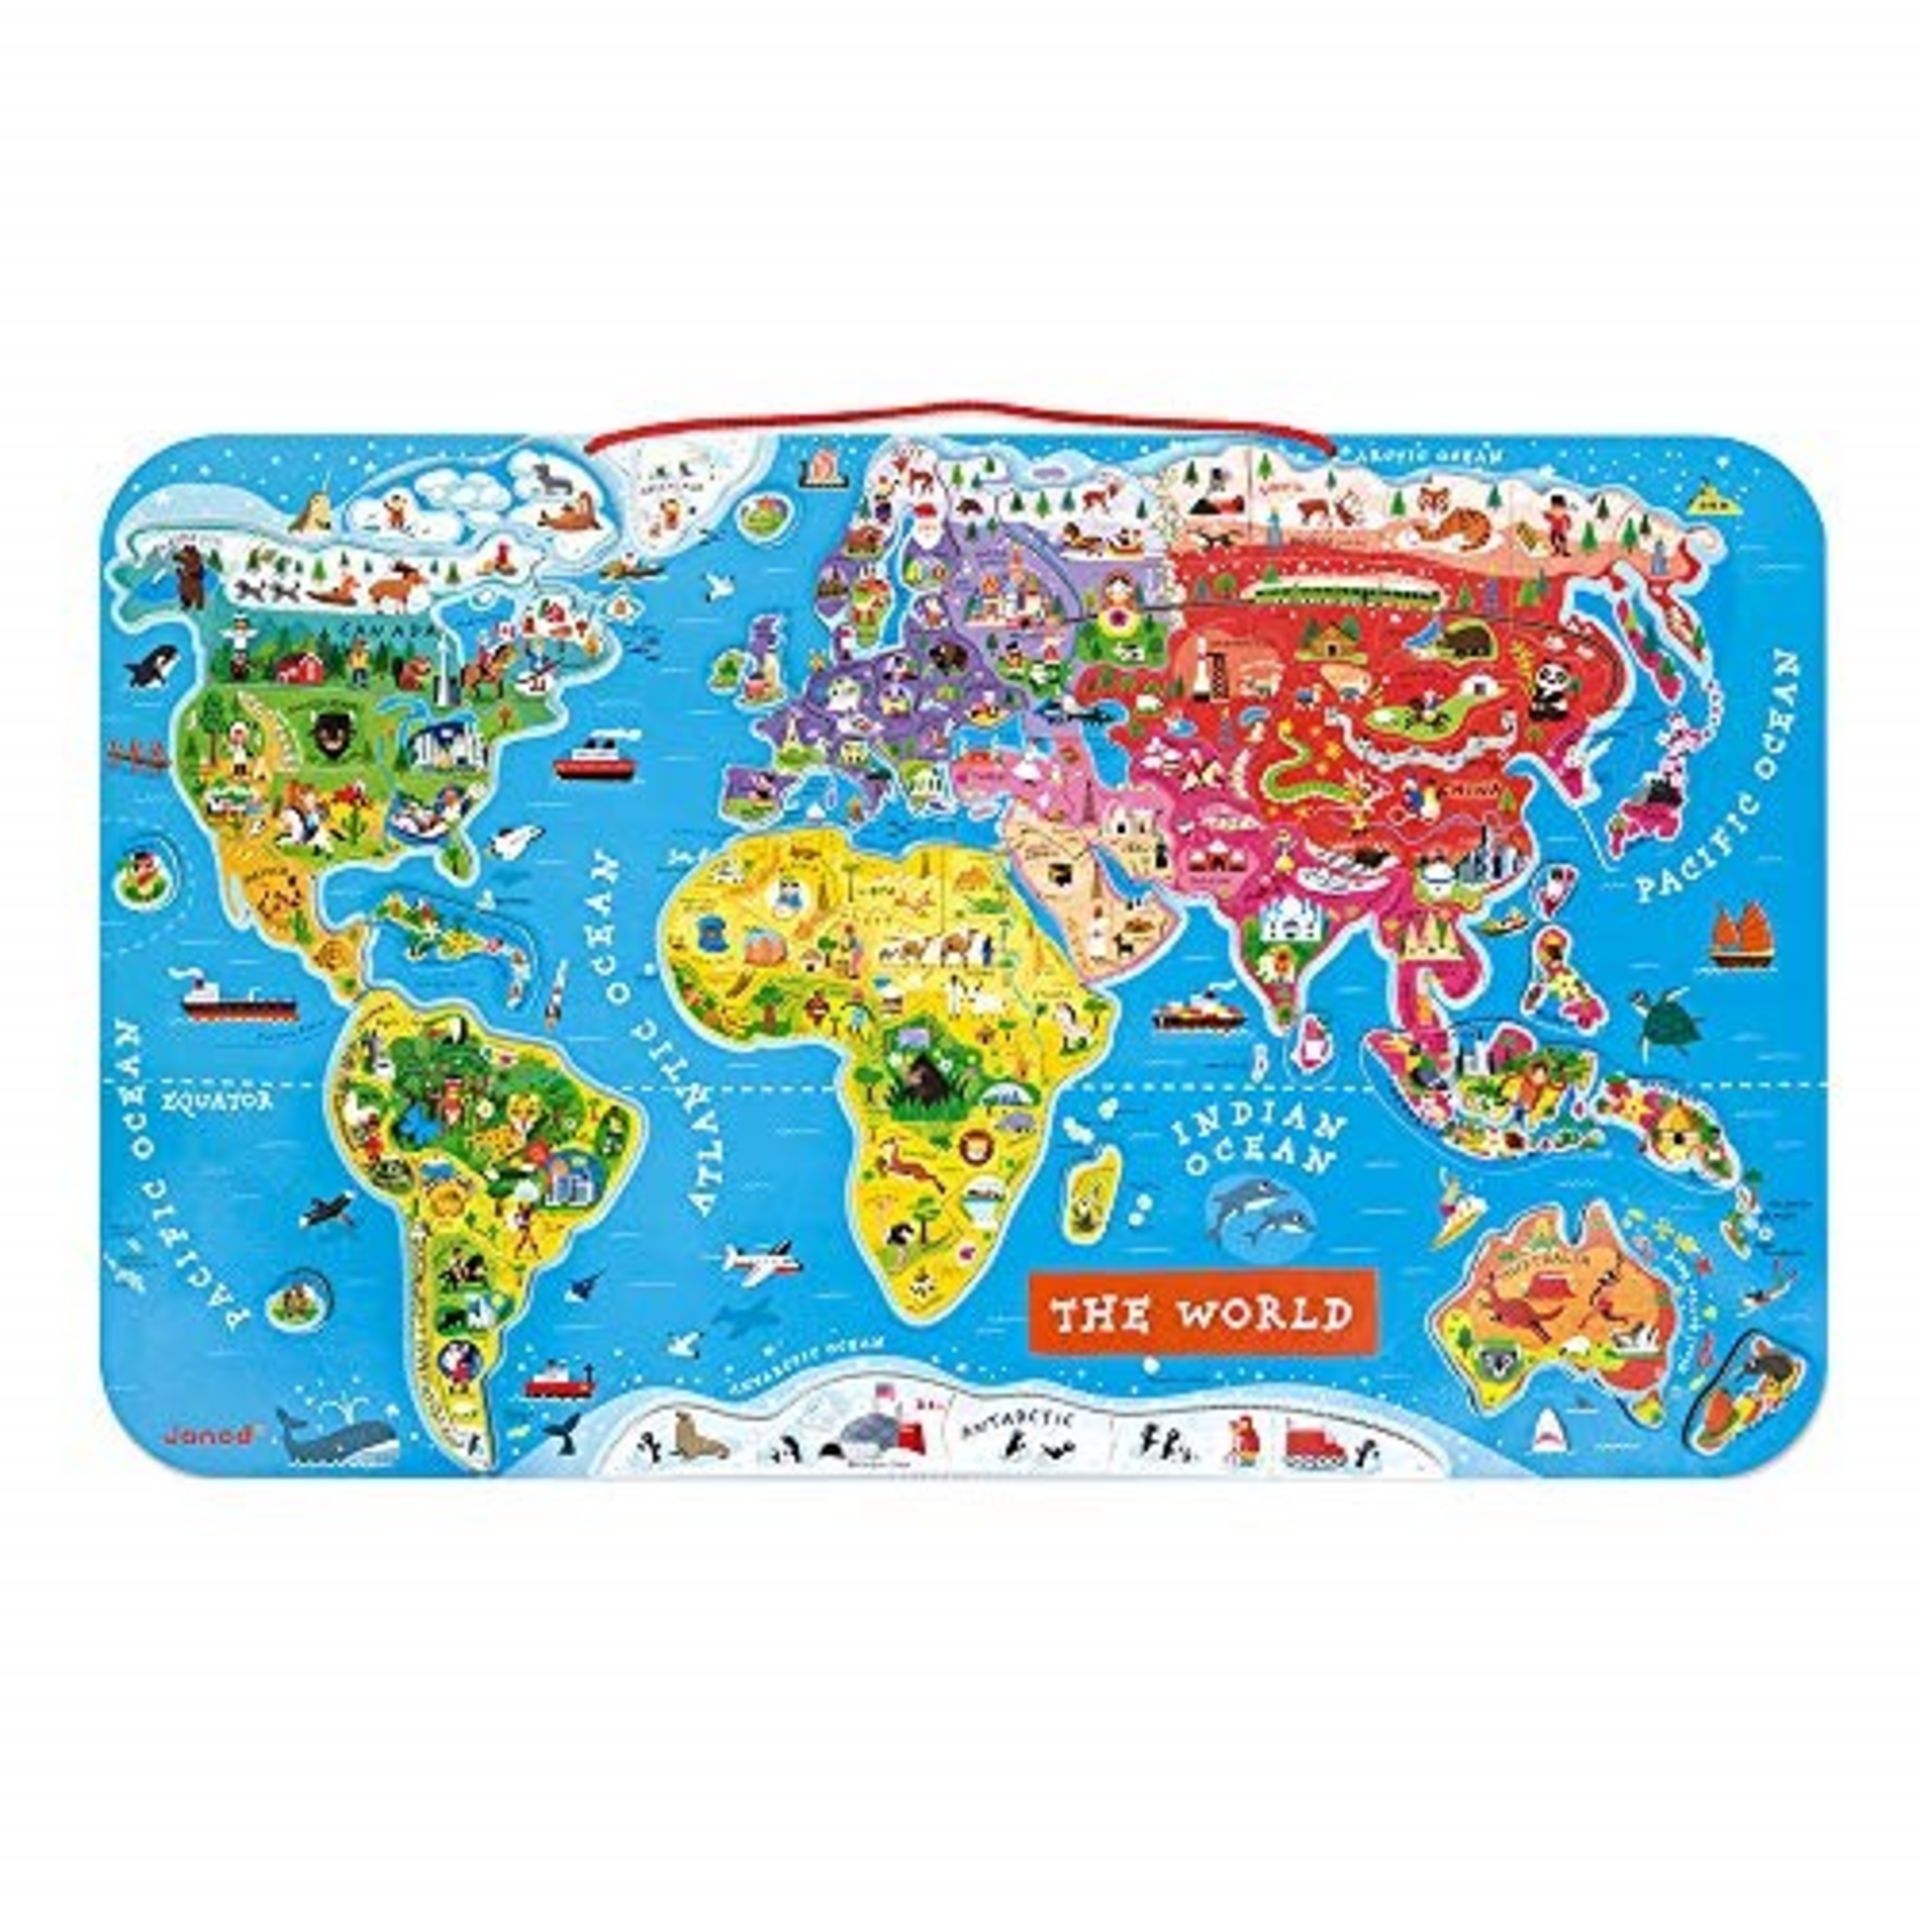 Janod Wooden Magnetic World Map Puzzle - 92 Magnetic Pieces - 70 x 43 cm - English Ver